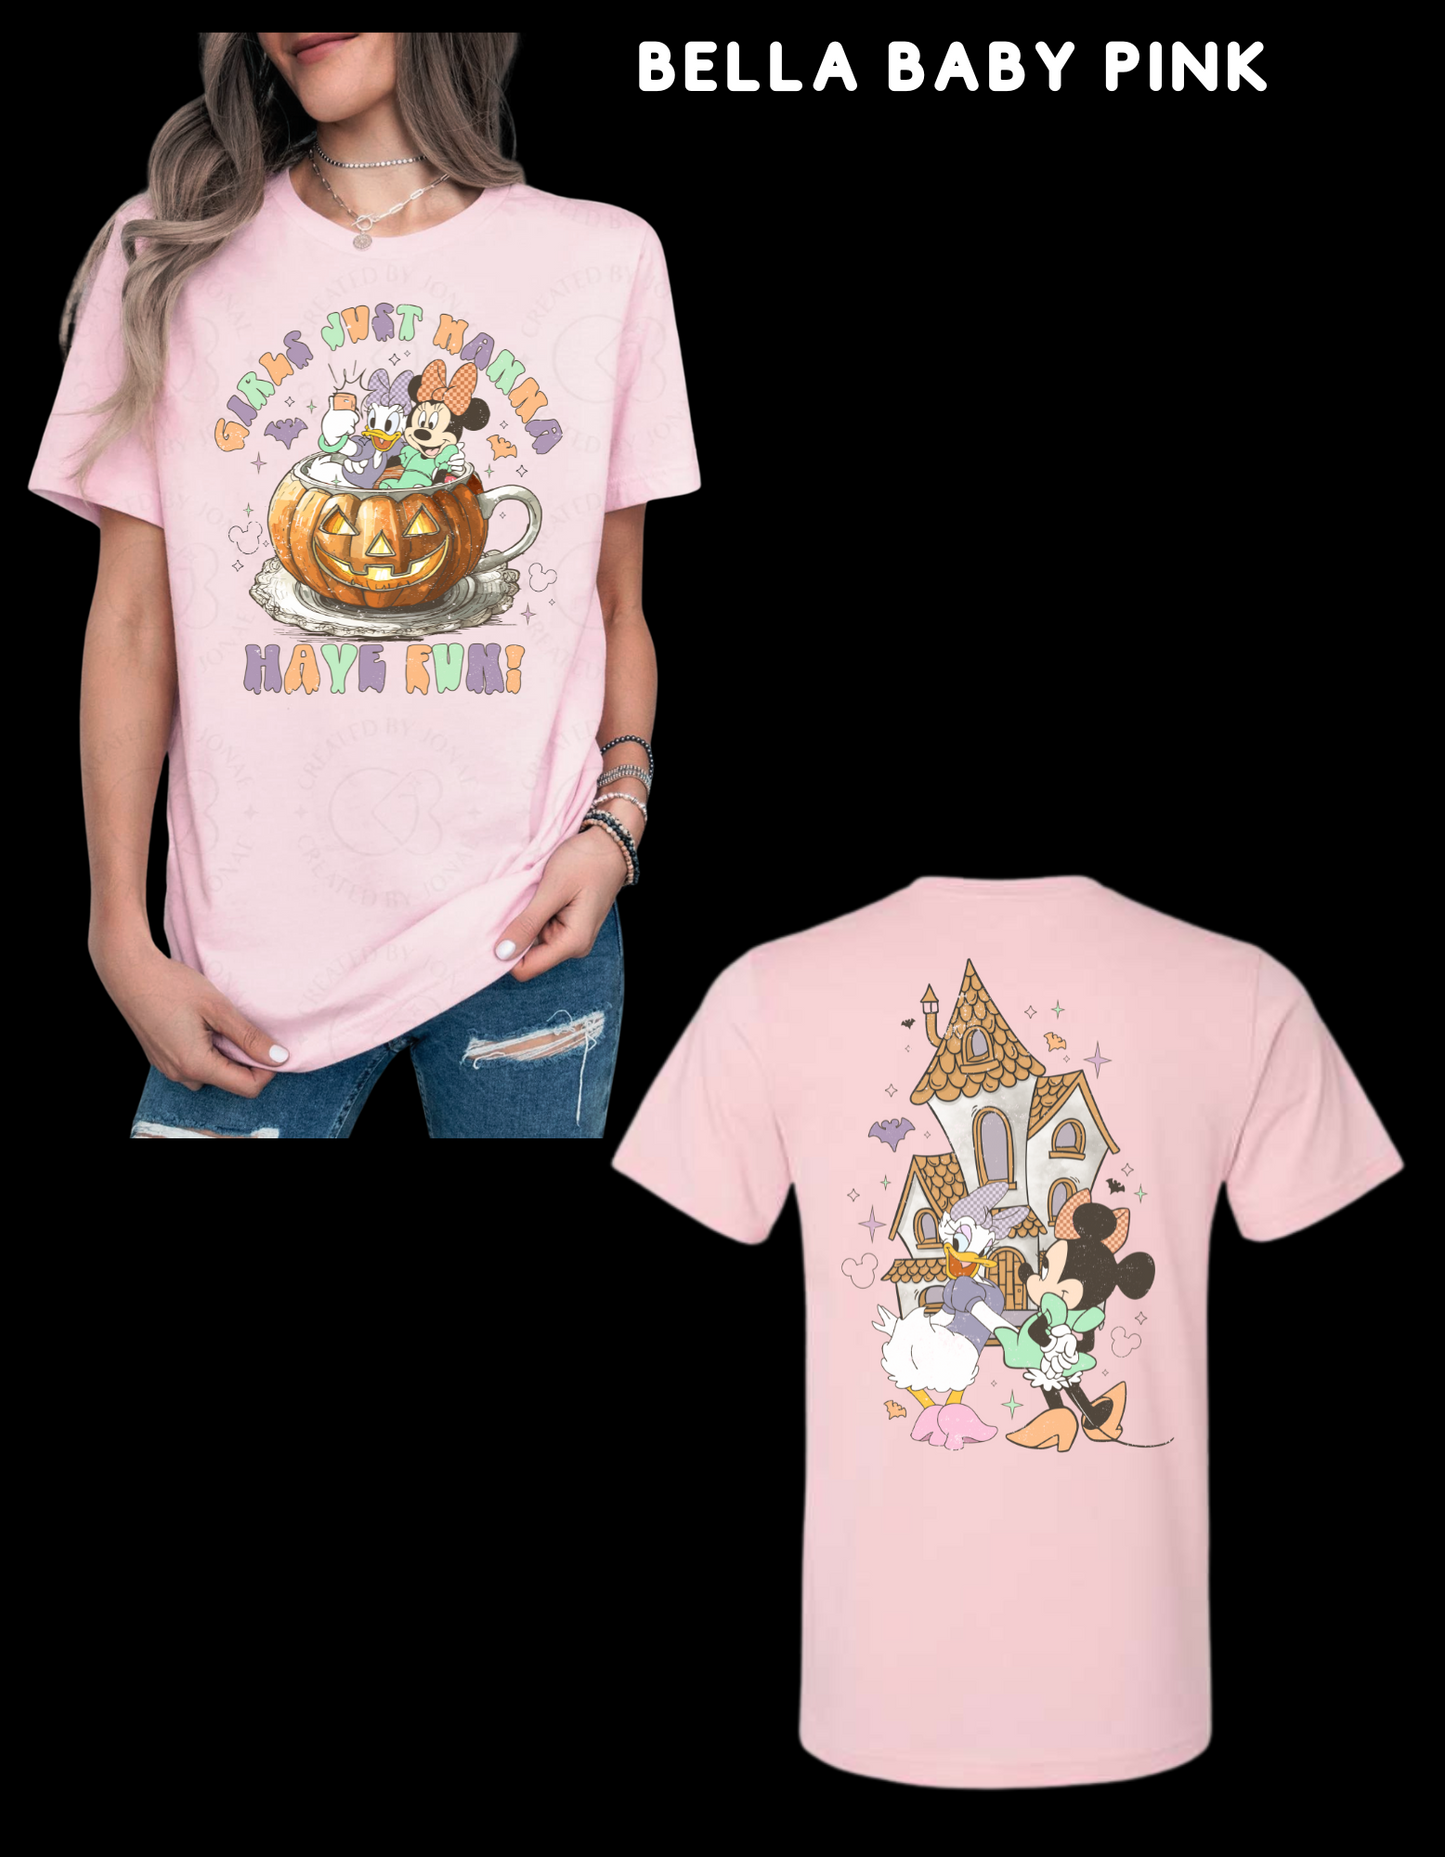 Girls just wanna have fun "HALLOWEEN STYLE" T-SHIRT ADULT SIZING